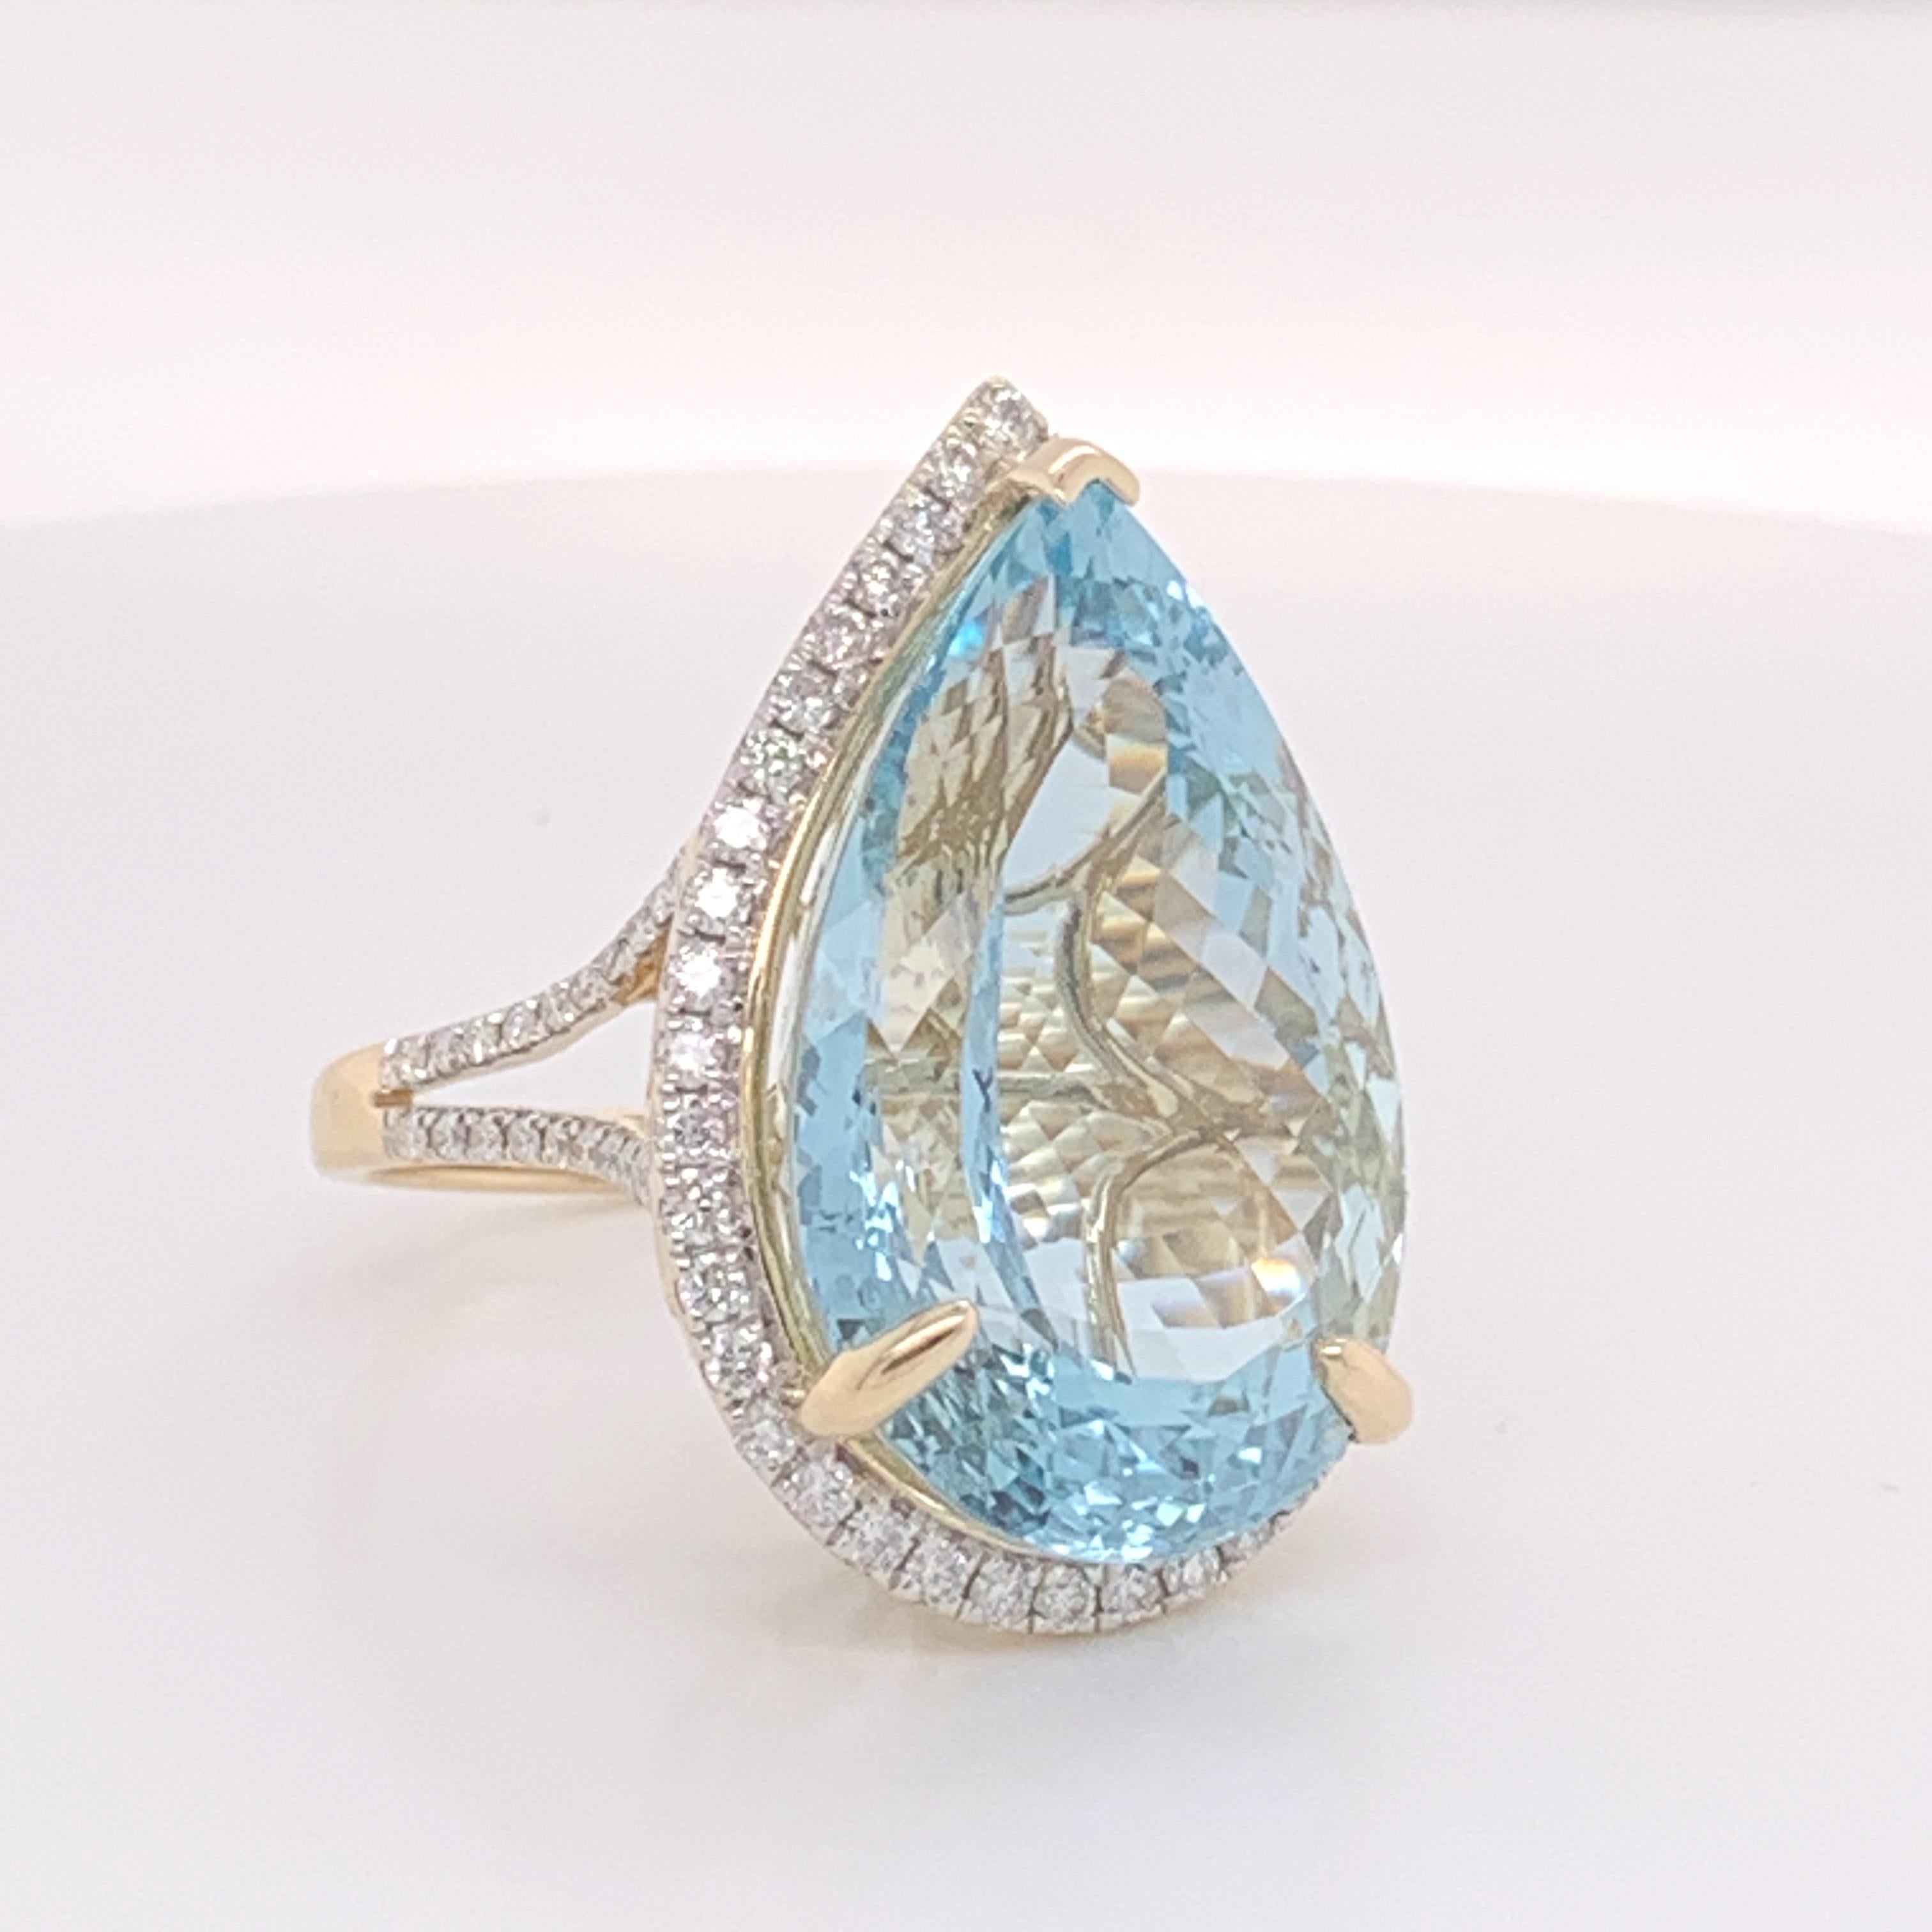 Natural Pear shape 26..71 Carat Aquamarine and 0.90 carat White Round Diamond ring set in 14 Karat Yellow Gold . The ring is Sizable 7. 

If you have any question or need additional photos do not hesitate to ask .